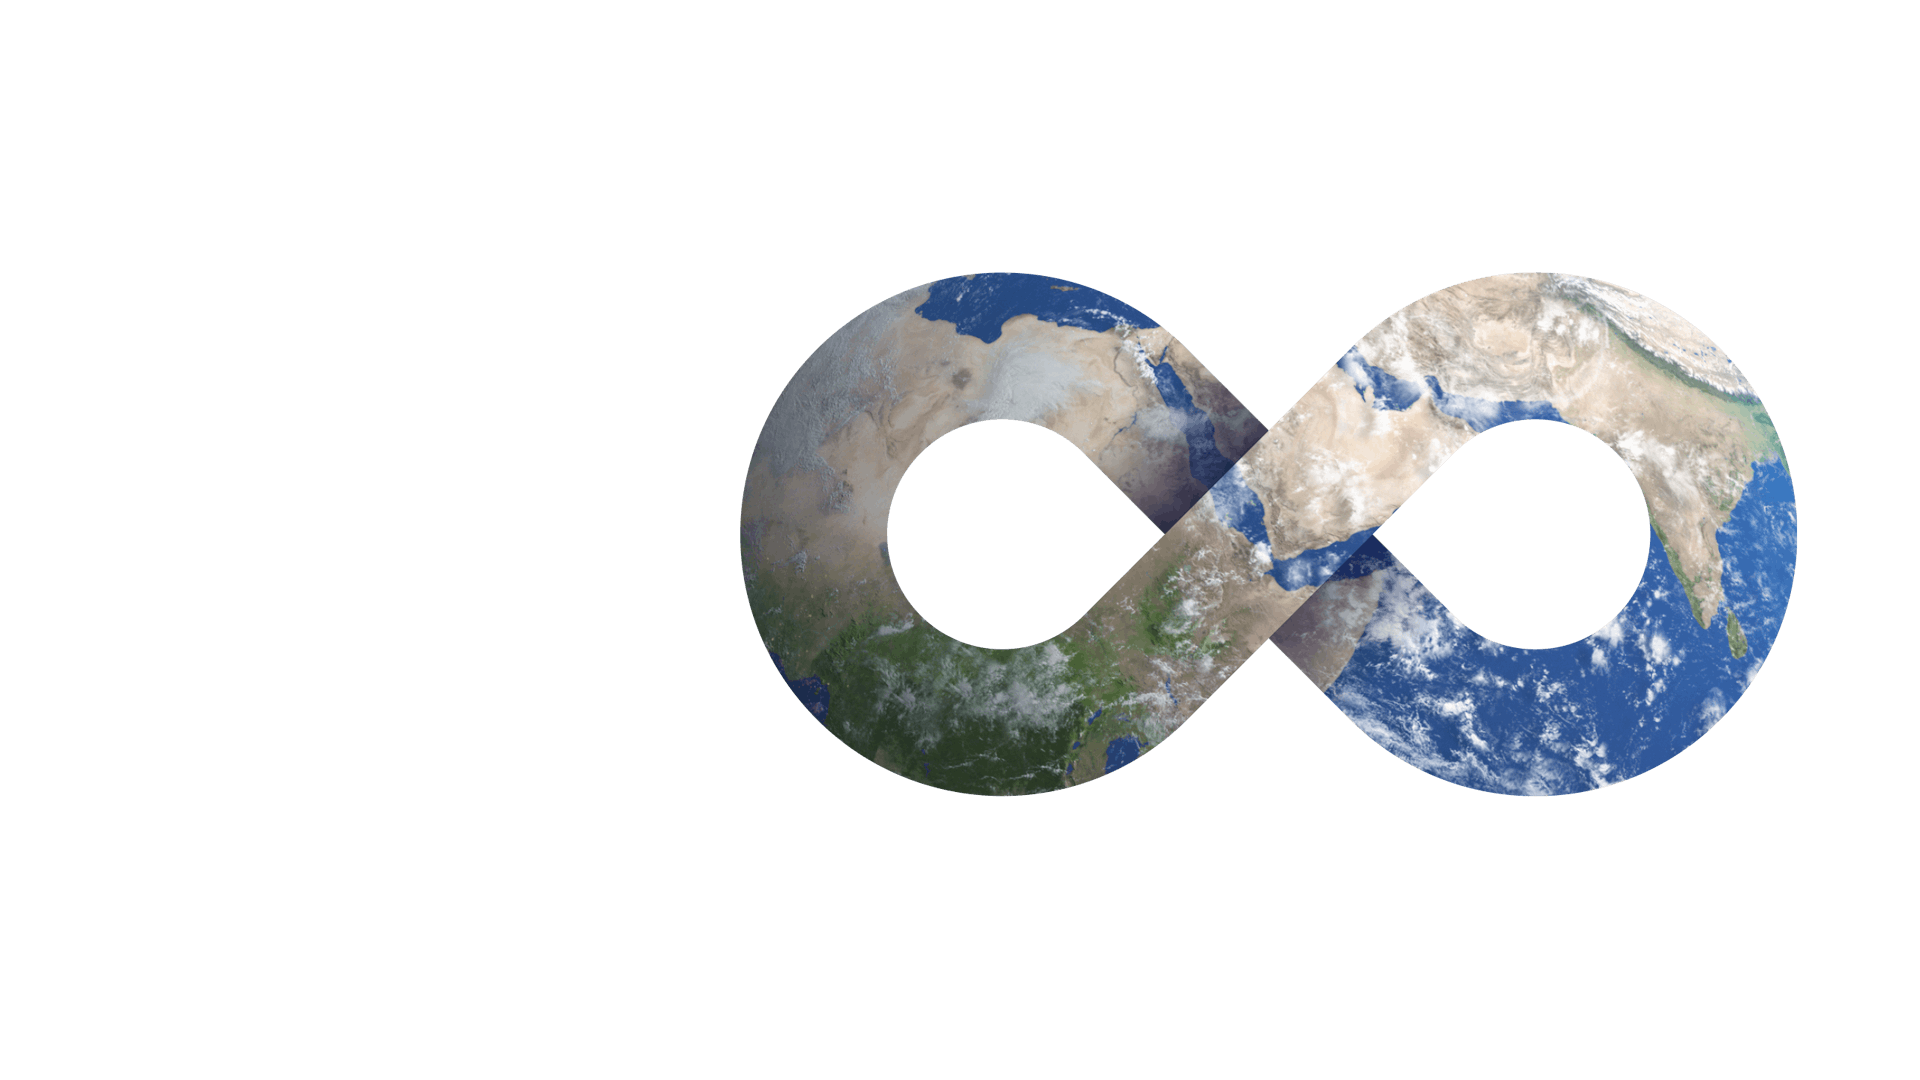 Siemens is bringing out of the world experiences and everything in between to our booth at CES. Our earth-focused infinity logo represents the future of sustainability.